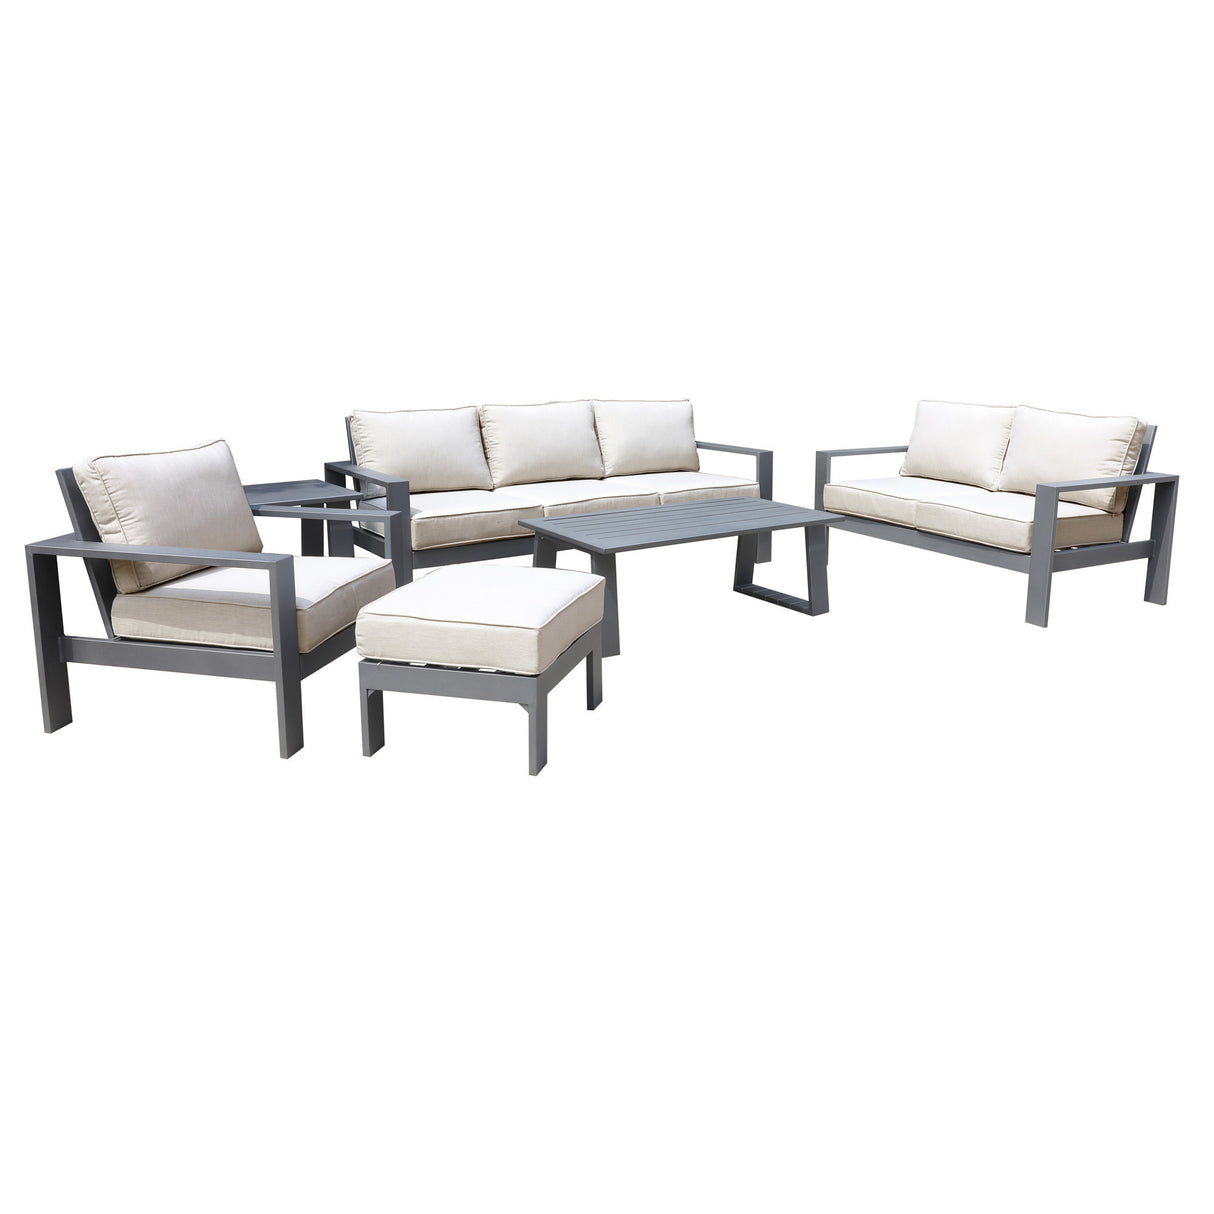 6 Piece Sofa Seating Group with Cushions, Powdered Pewter